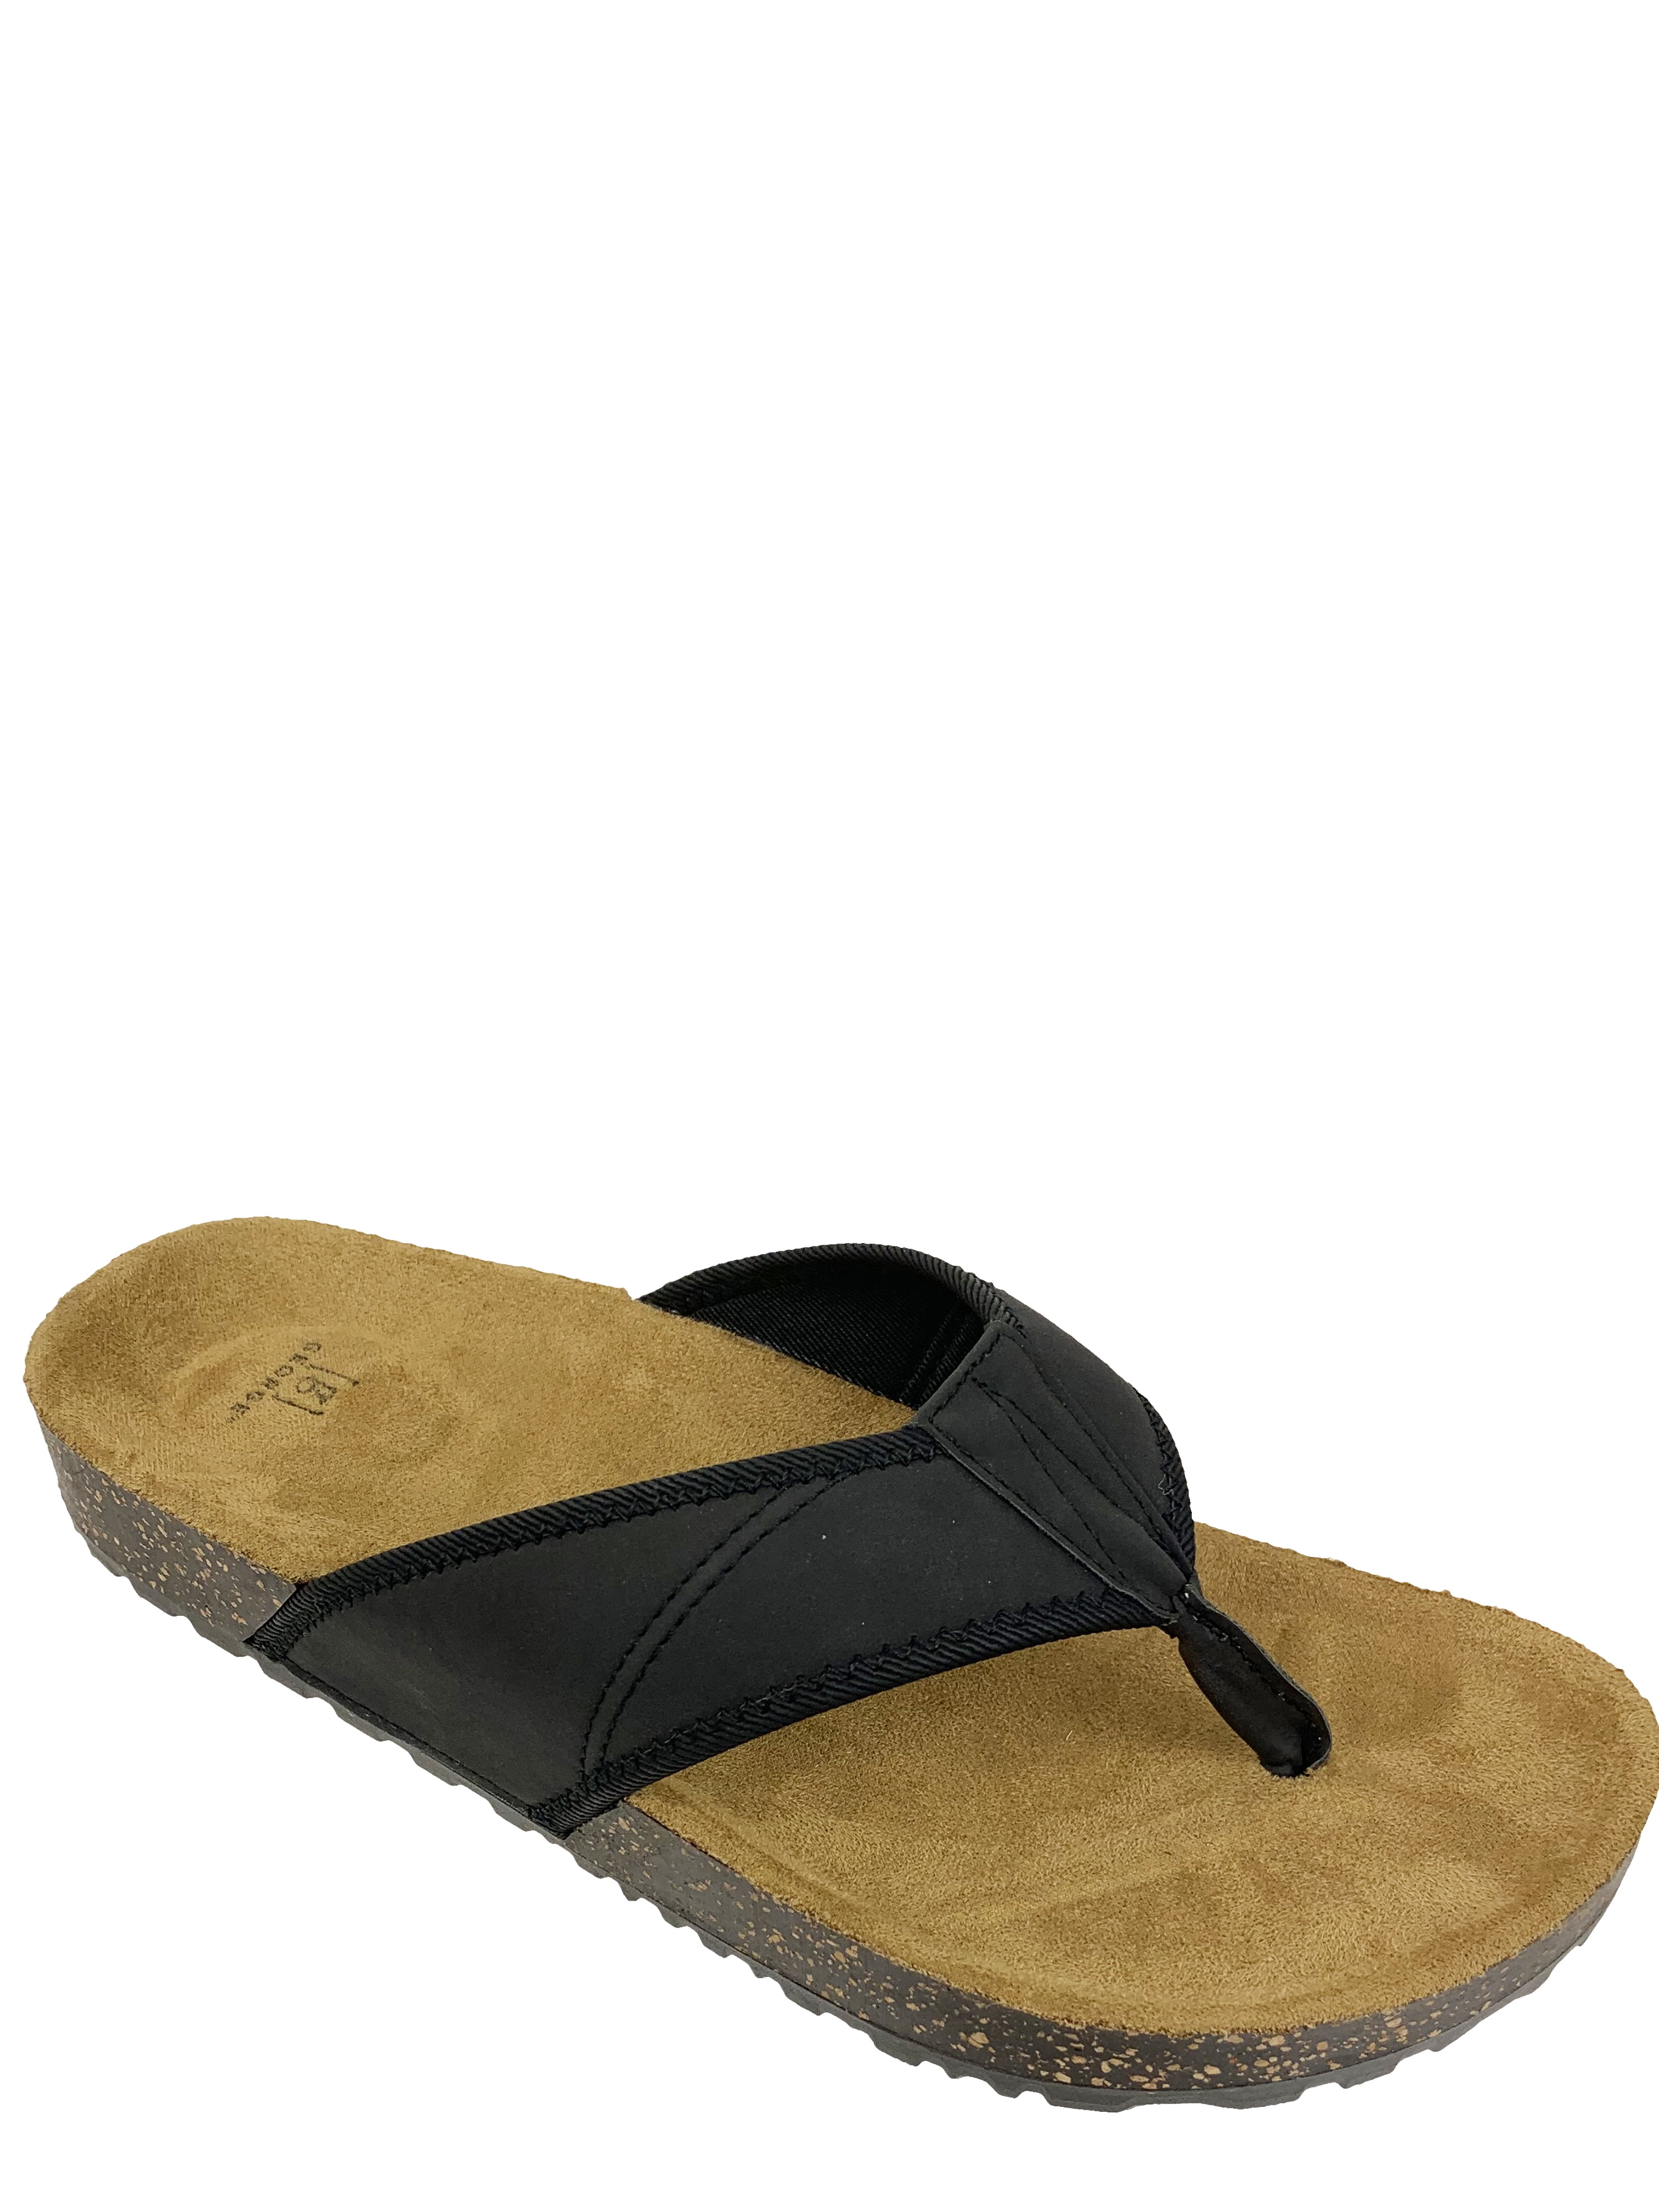 mens leather flip flop slippers